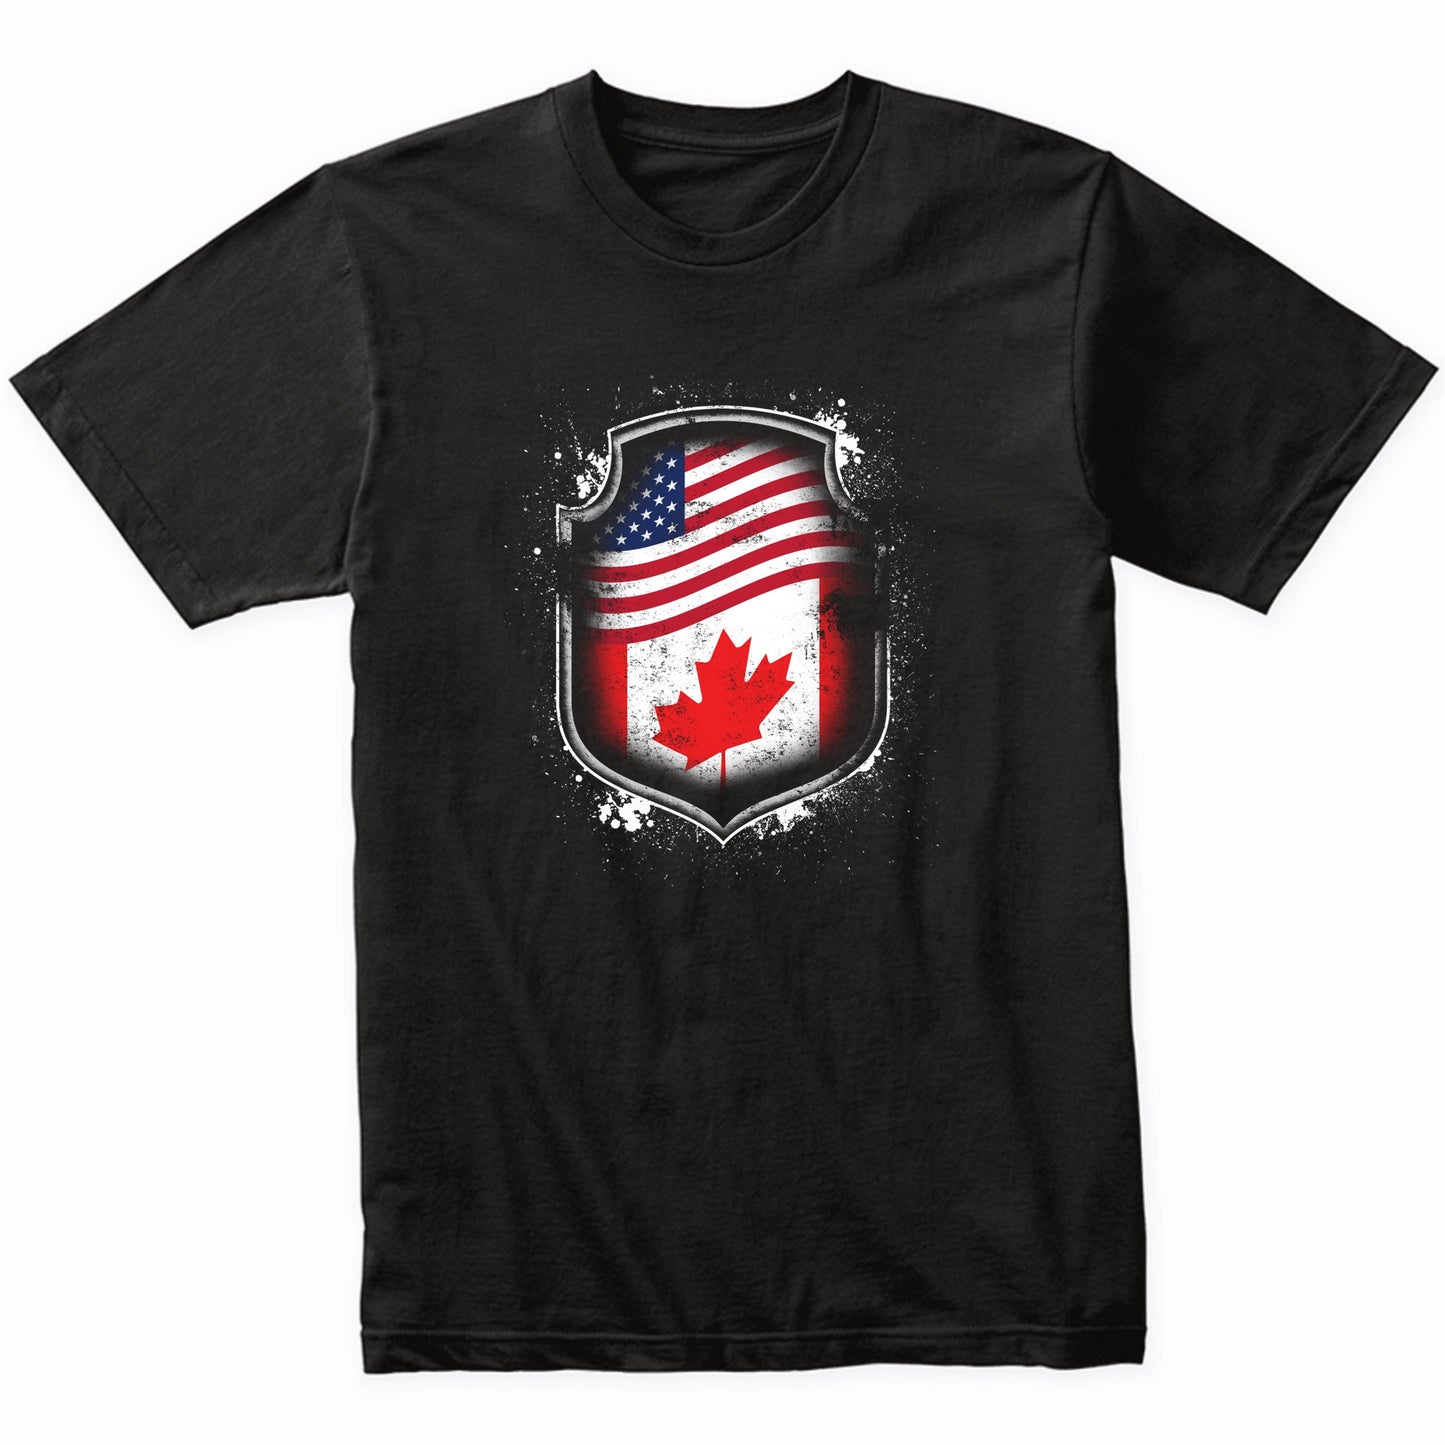 Canadian American Shirt Flags Of Canada and America T-Shirt